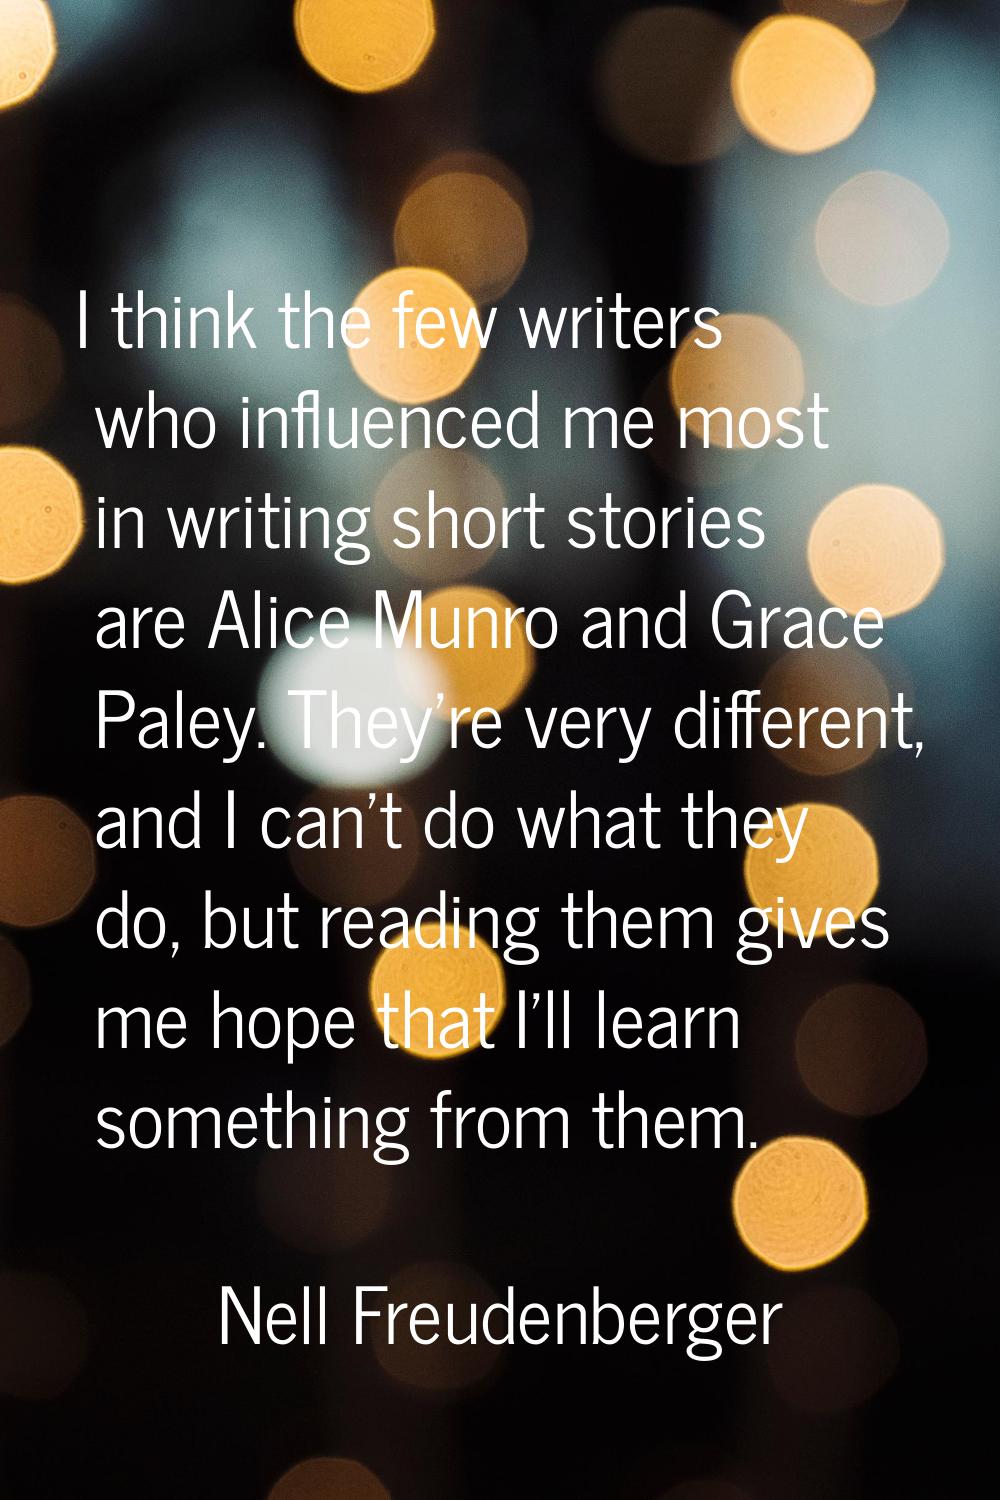 I think the few writers who influenced me most in writing short stories are Alice Munro and Grace P